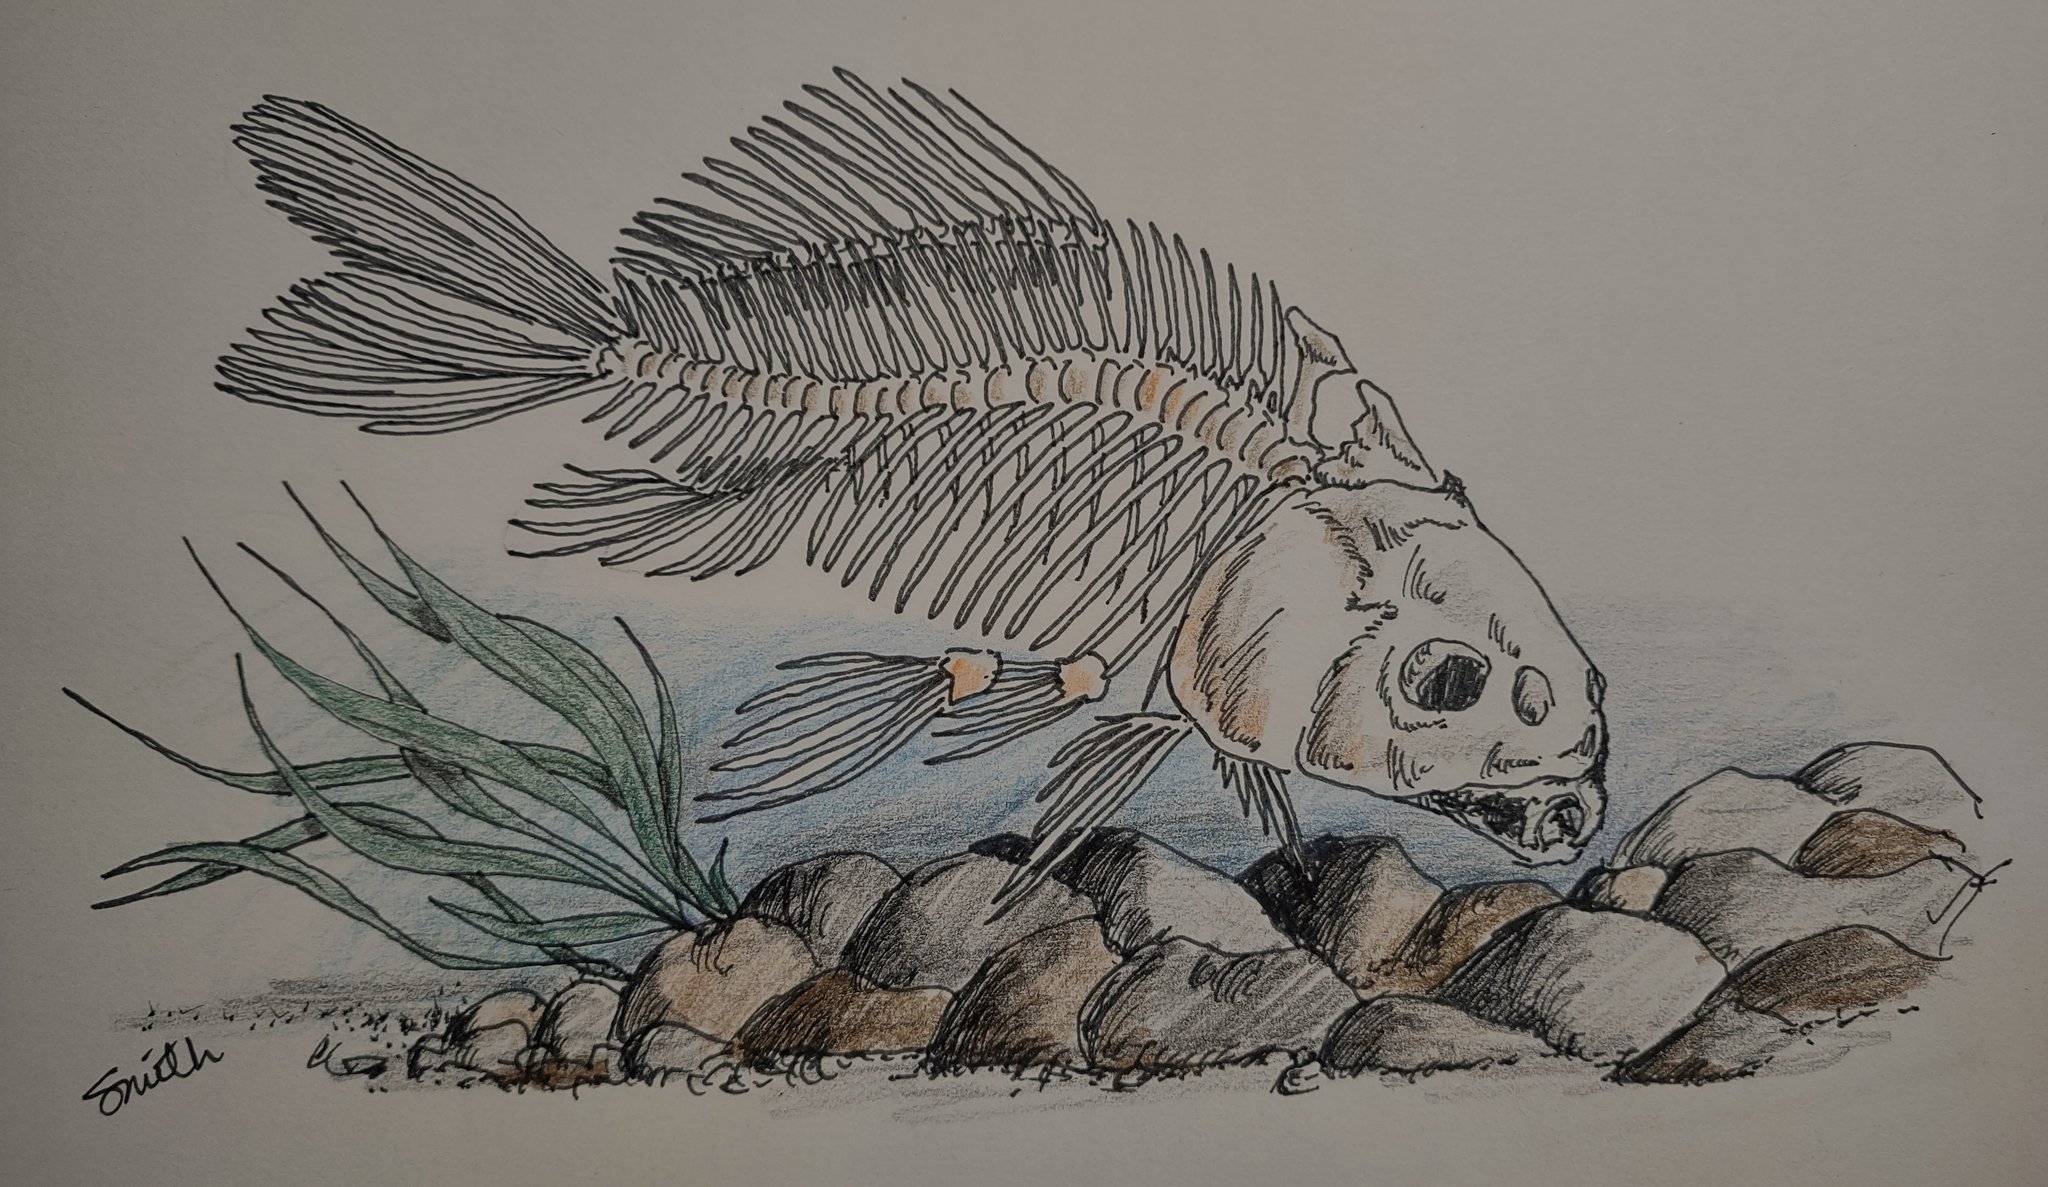 Creative Mitch on X: This #SundayFishSketch strayed a bit from